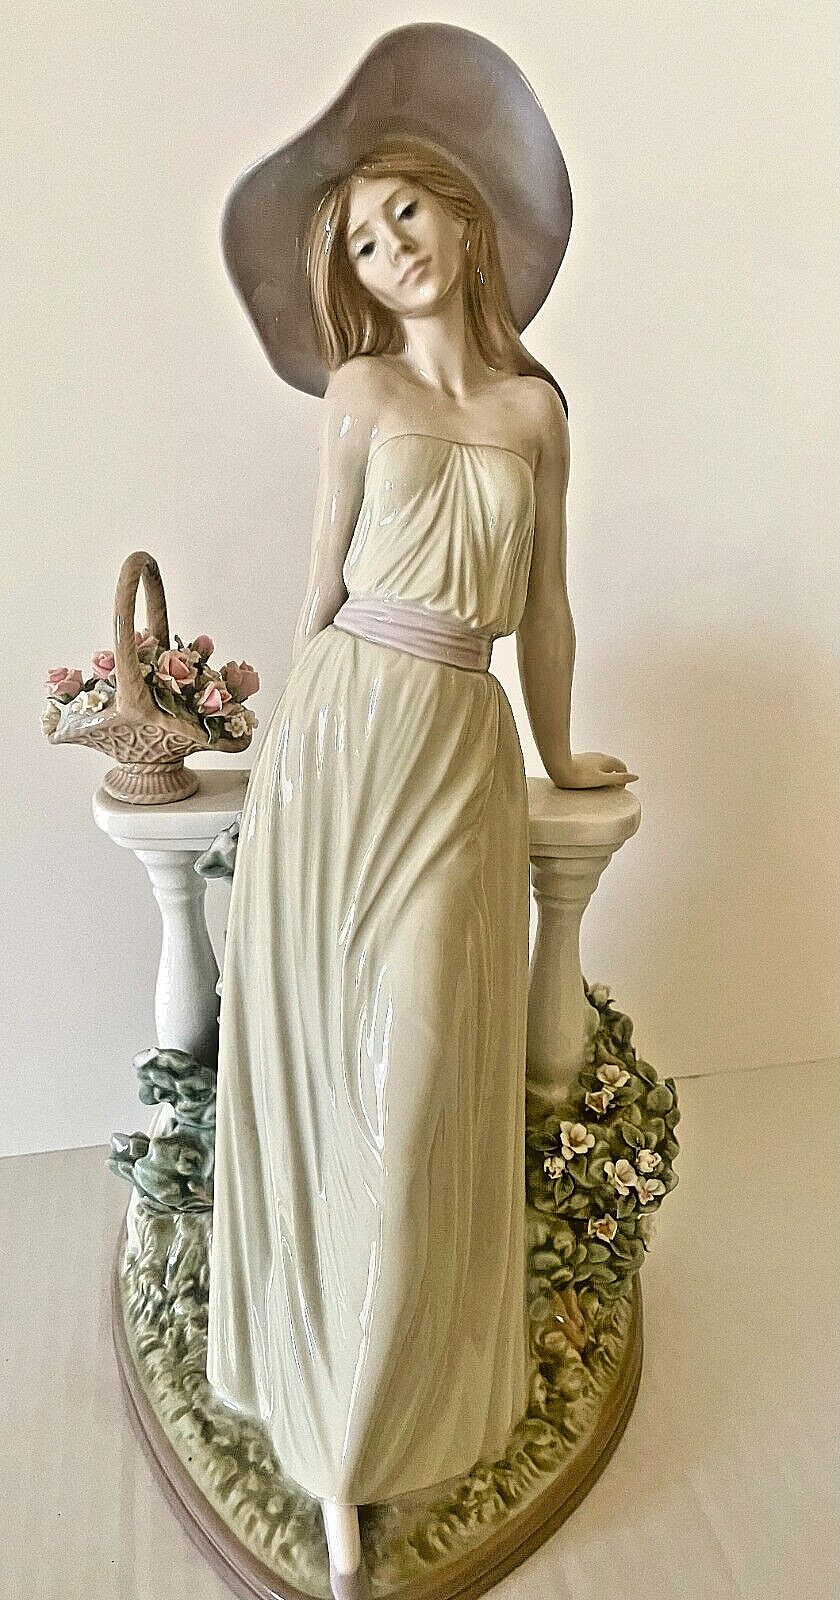 Lladro Figurine Collectible Vintage Time for Reflection Handmade 1985 Signed